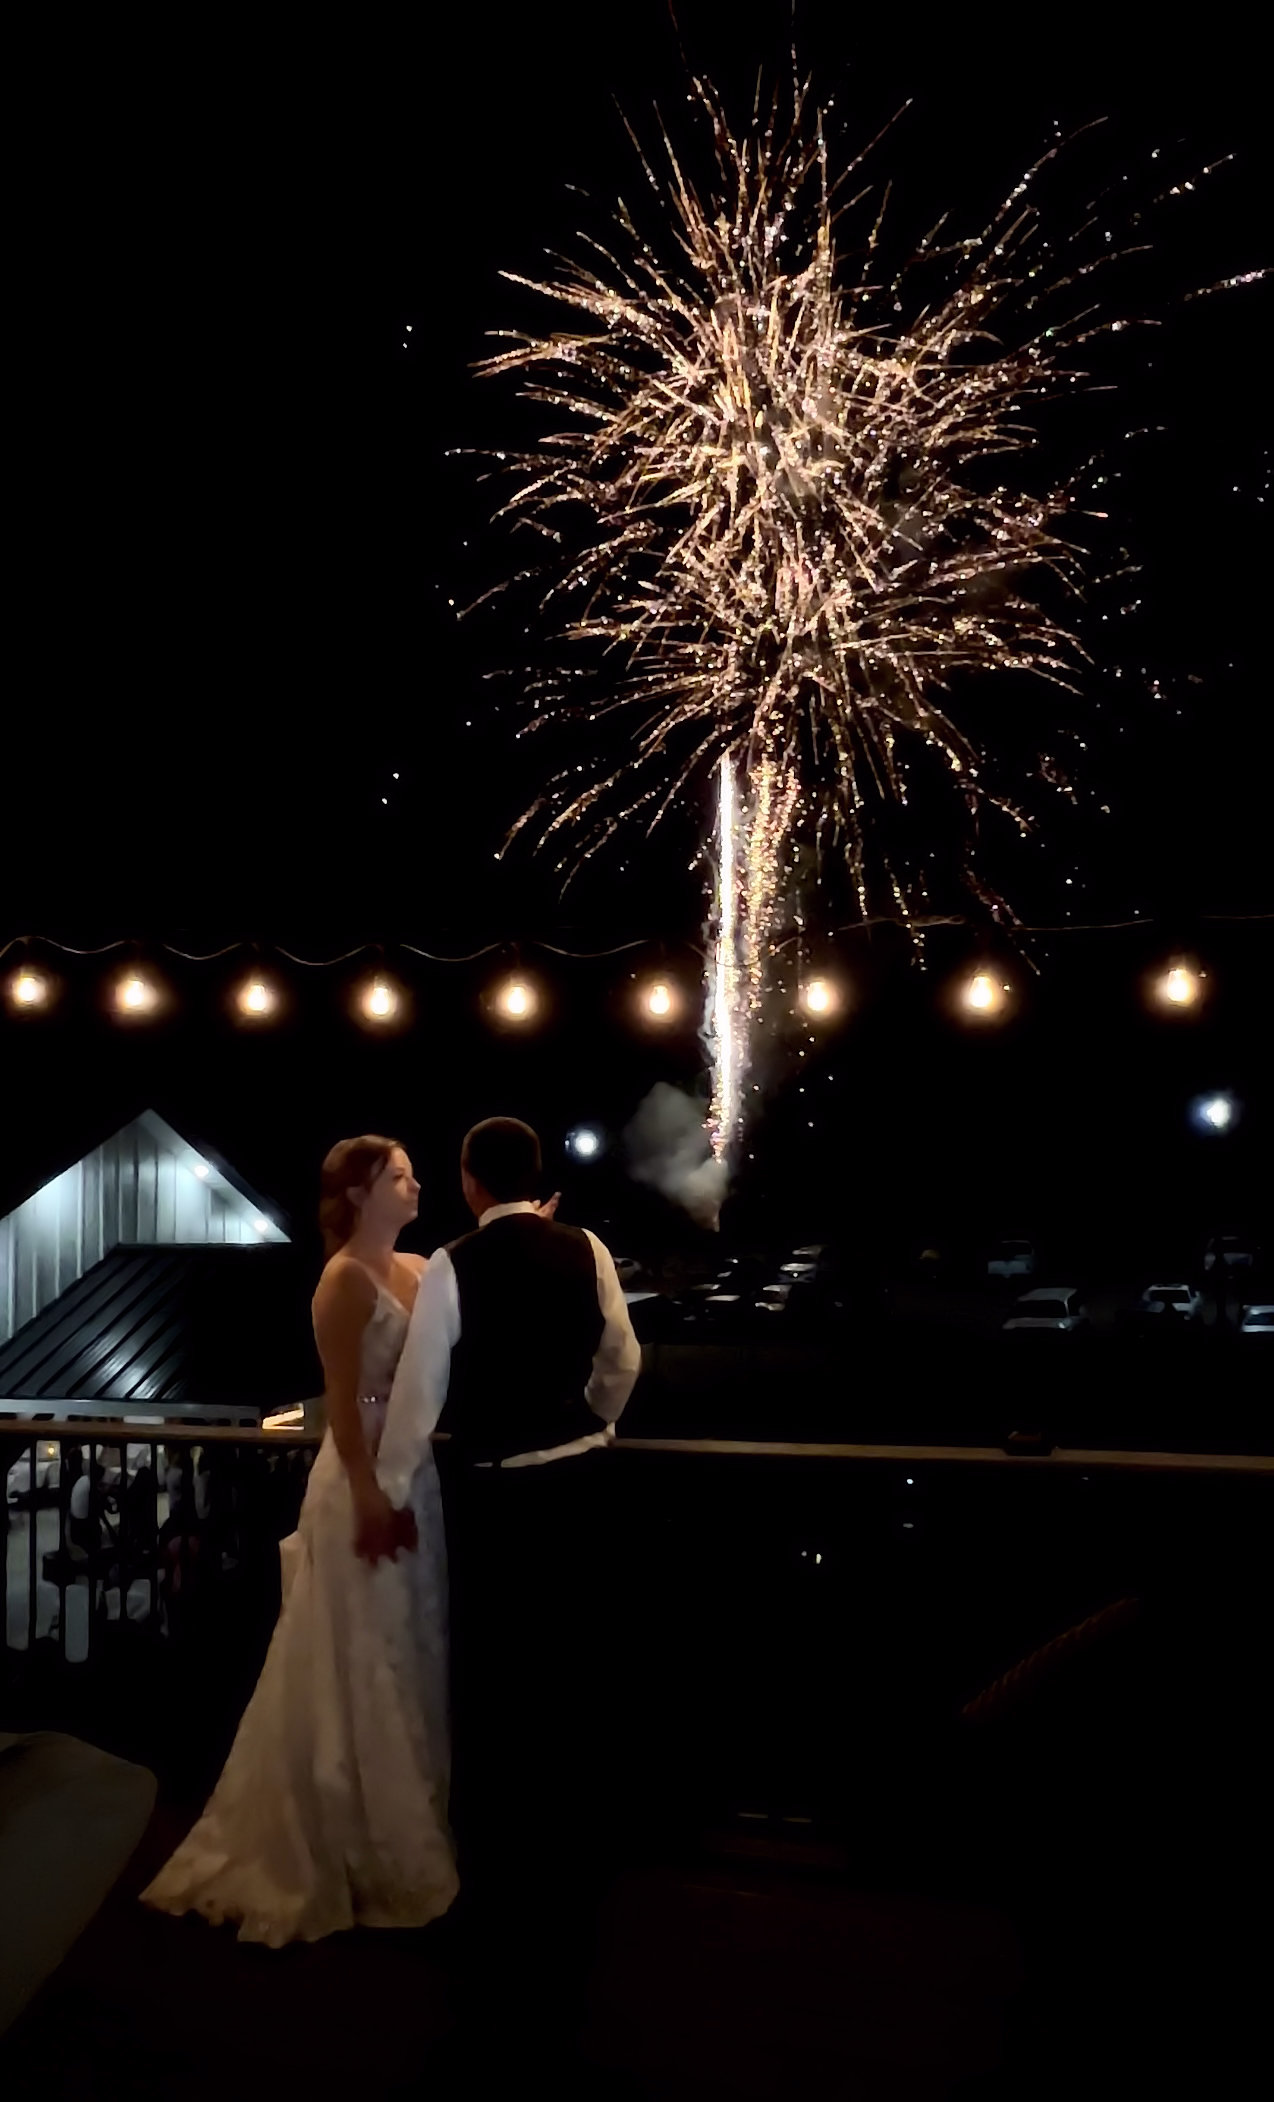 Couple standing on a balcony watching fireworks